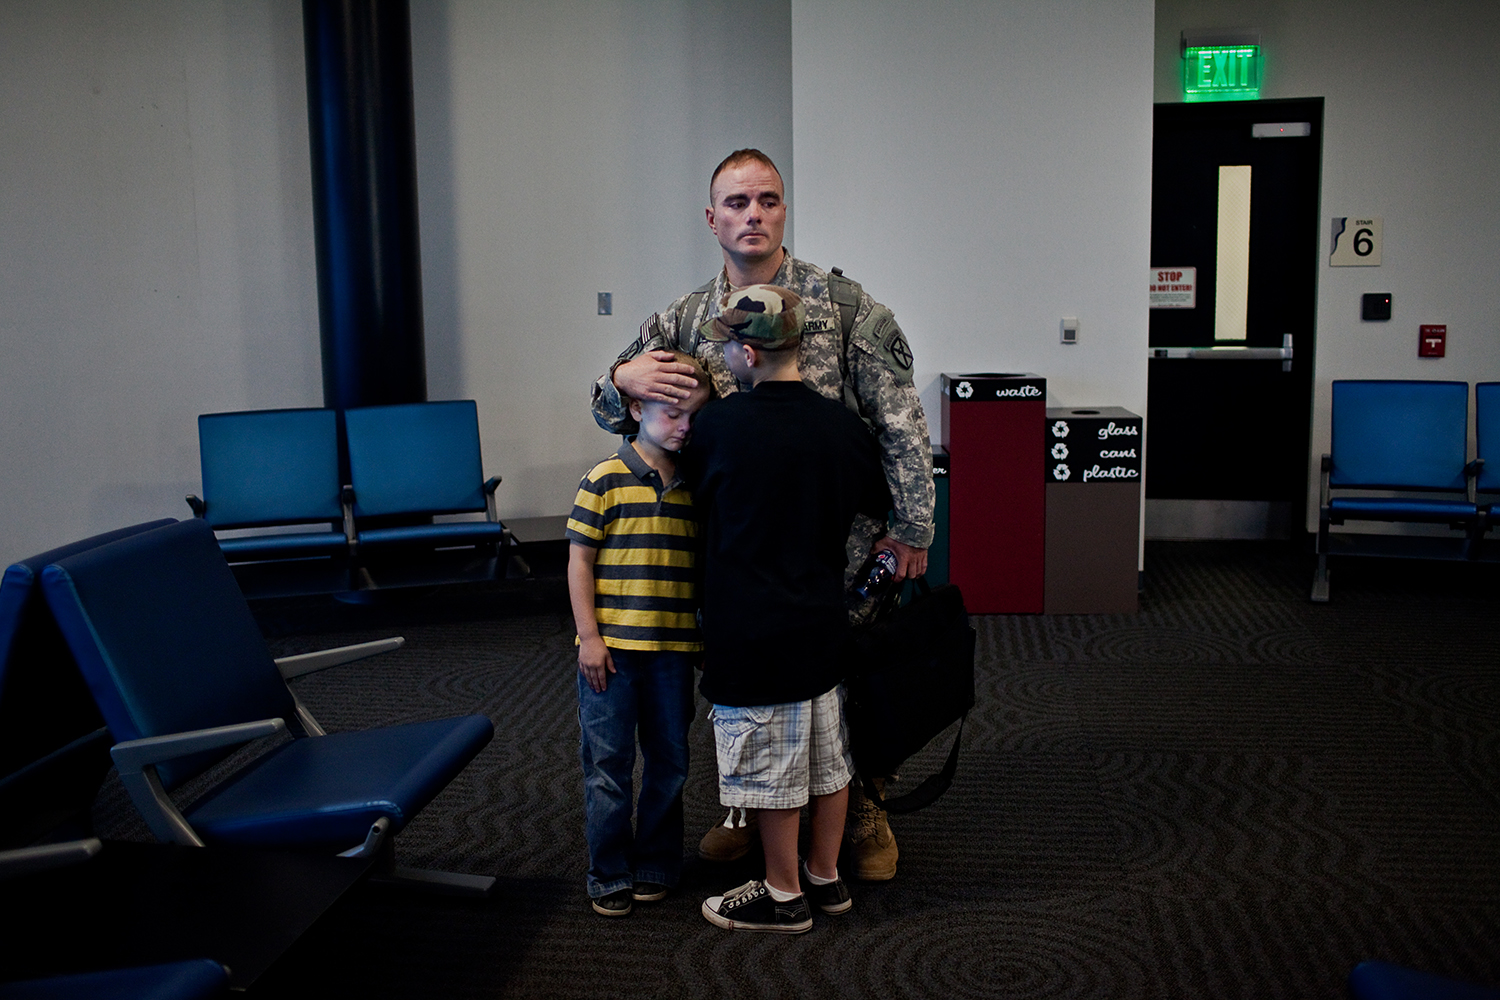  As the departure gate empties out into the boarding plane, Sergeant First Class Brian Eisch says goodbye to both his sons with a quiet embrace. 